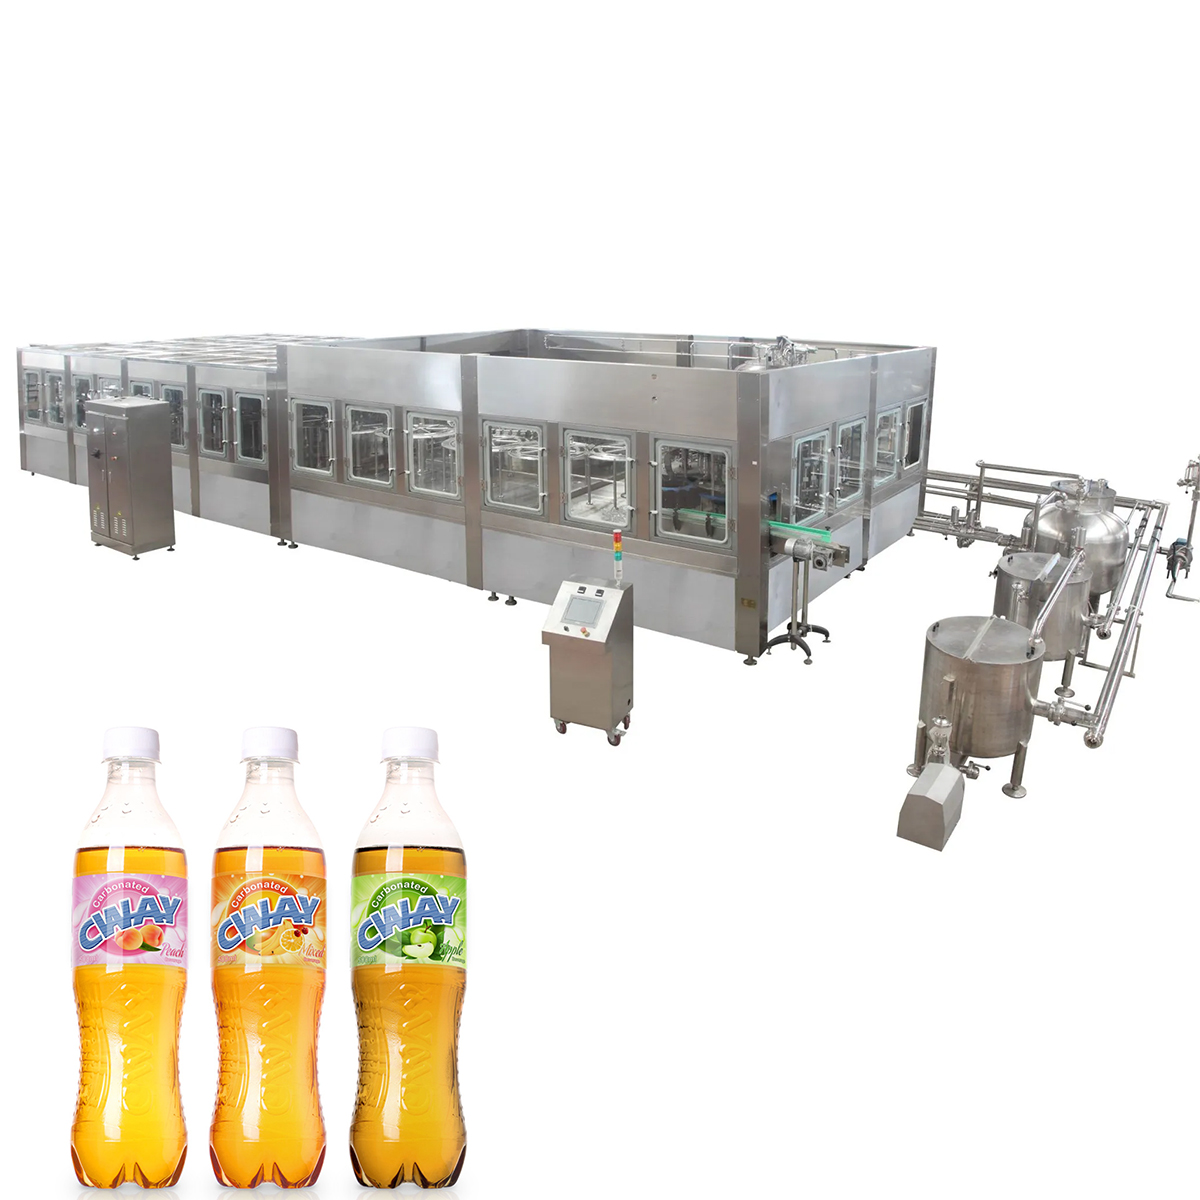 Carbonated Beverage Filling Machine: Achieving Efficient Production and Diverse Packaging